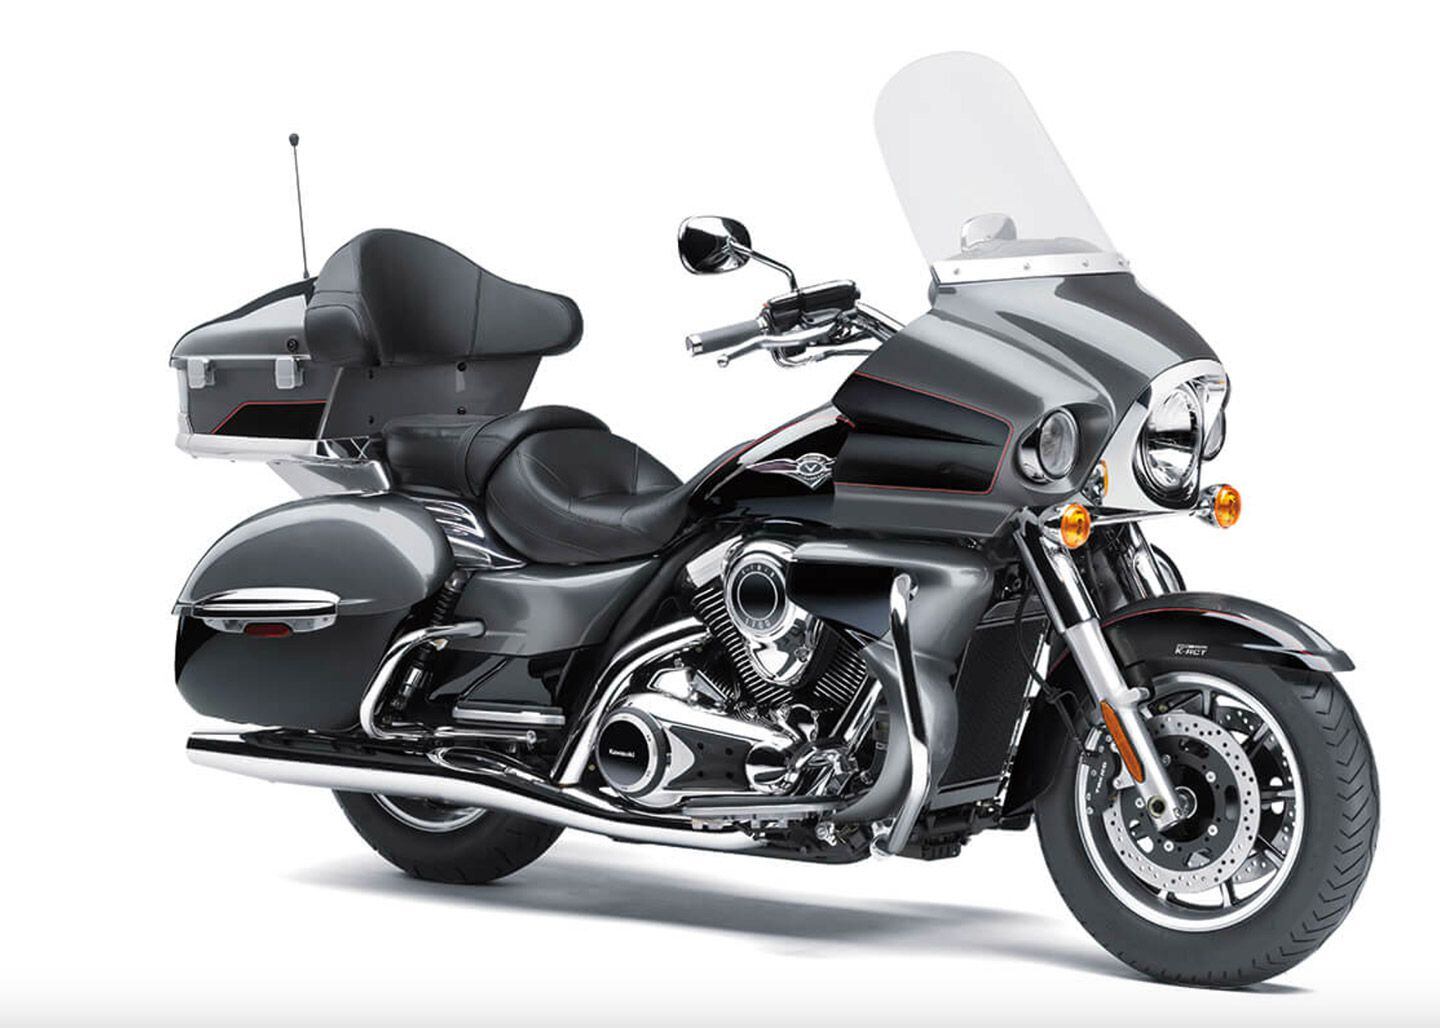 Where to go on your Kawasaki Vulcan 1700 Voyager? First, decide what to do with the $10,000-plus you saved.